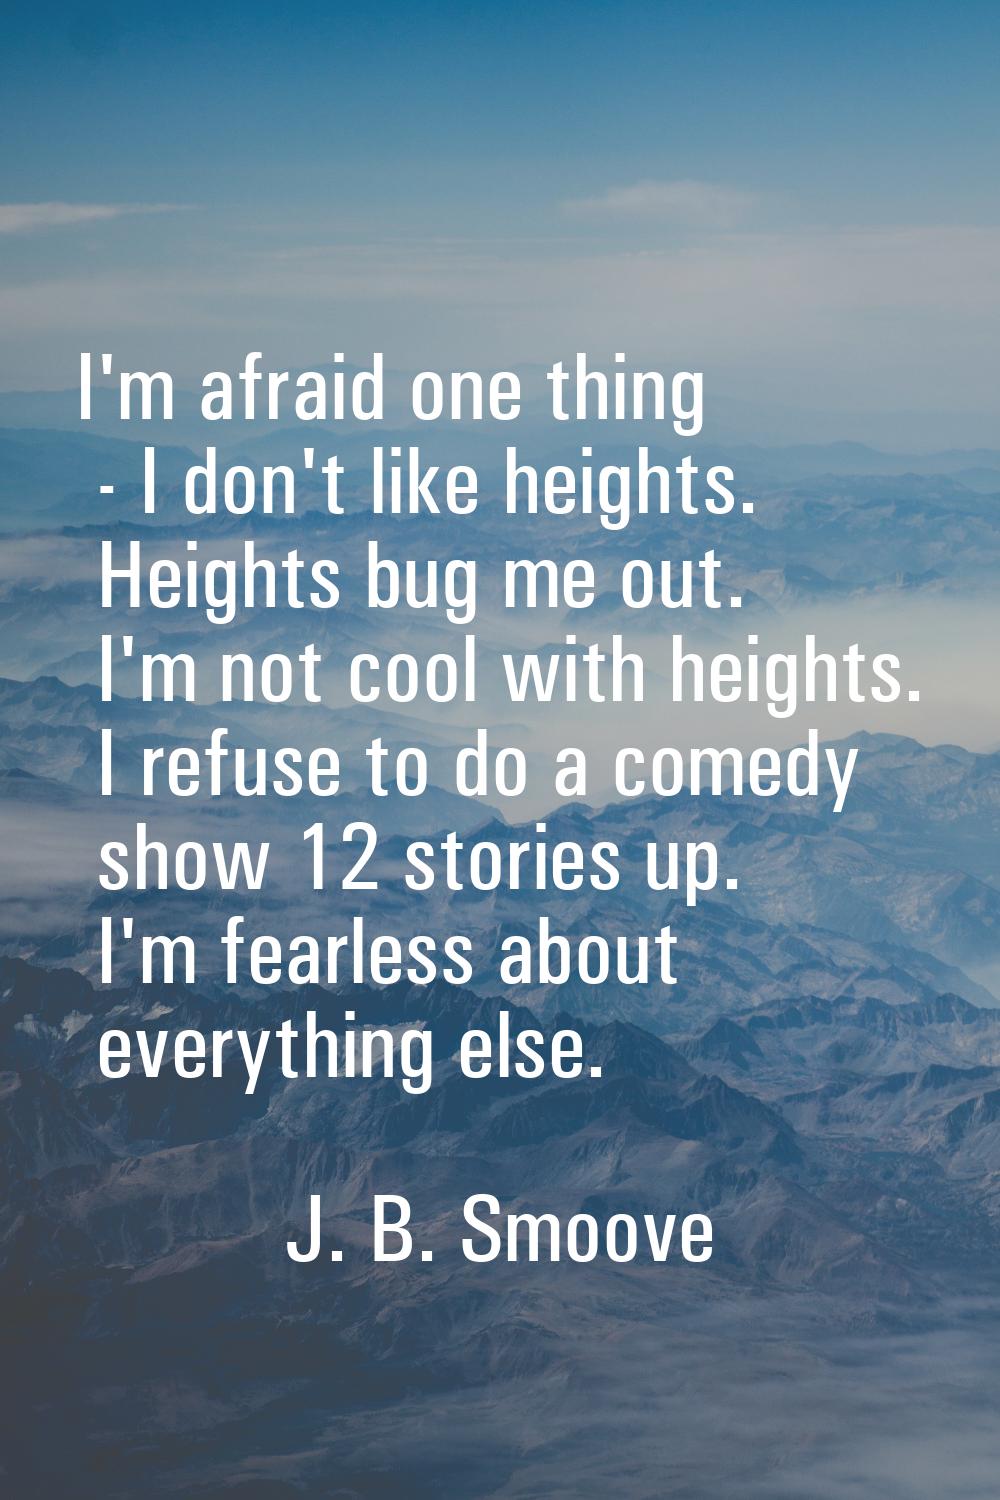 I'm afraid one thing - I don't like heights. Heights bug me out. I'm not cool with heights. I refus